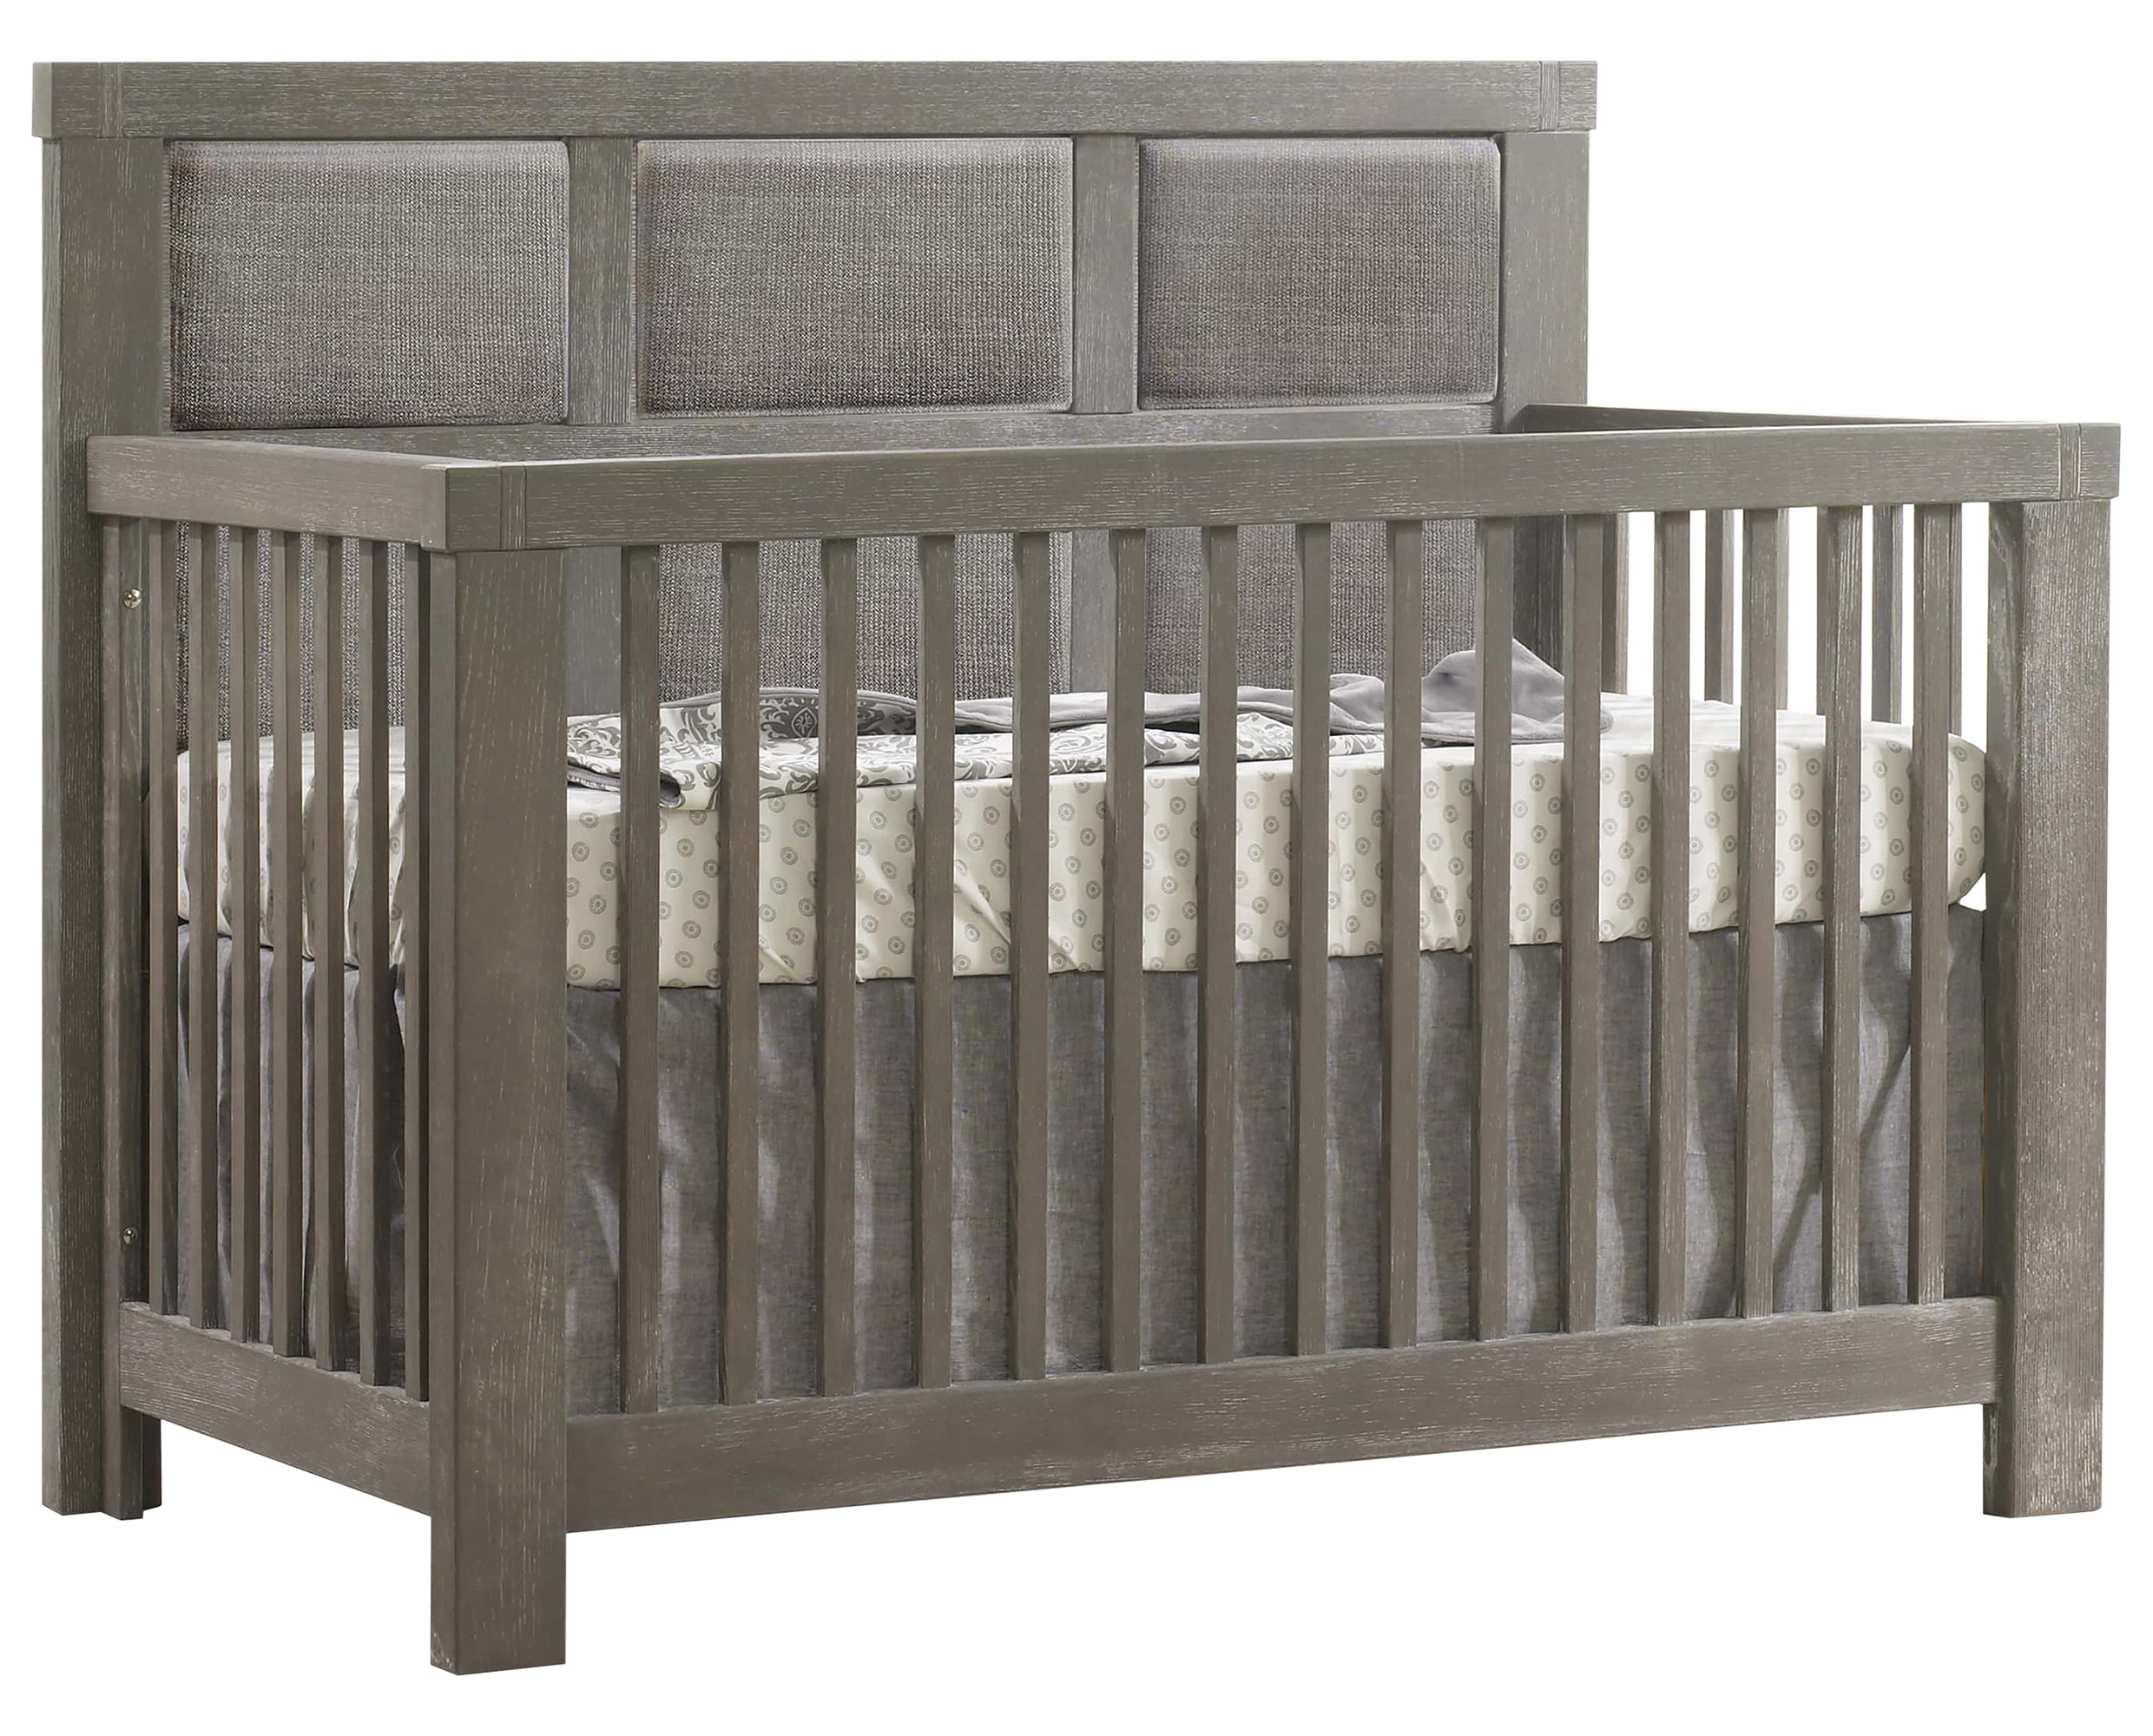 Owl Brushed Oak with Fog Fabric | Rustico 5-in-1 Convertible Crib w/Upholstered Headboard Panels | Valley Ridge Furniture